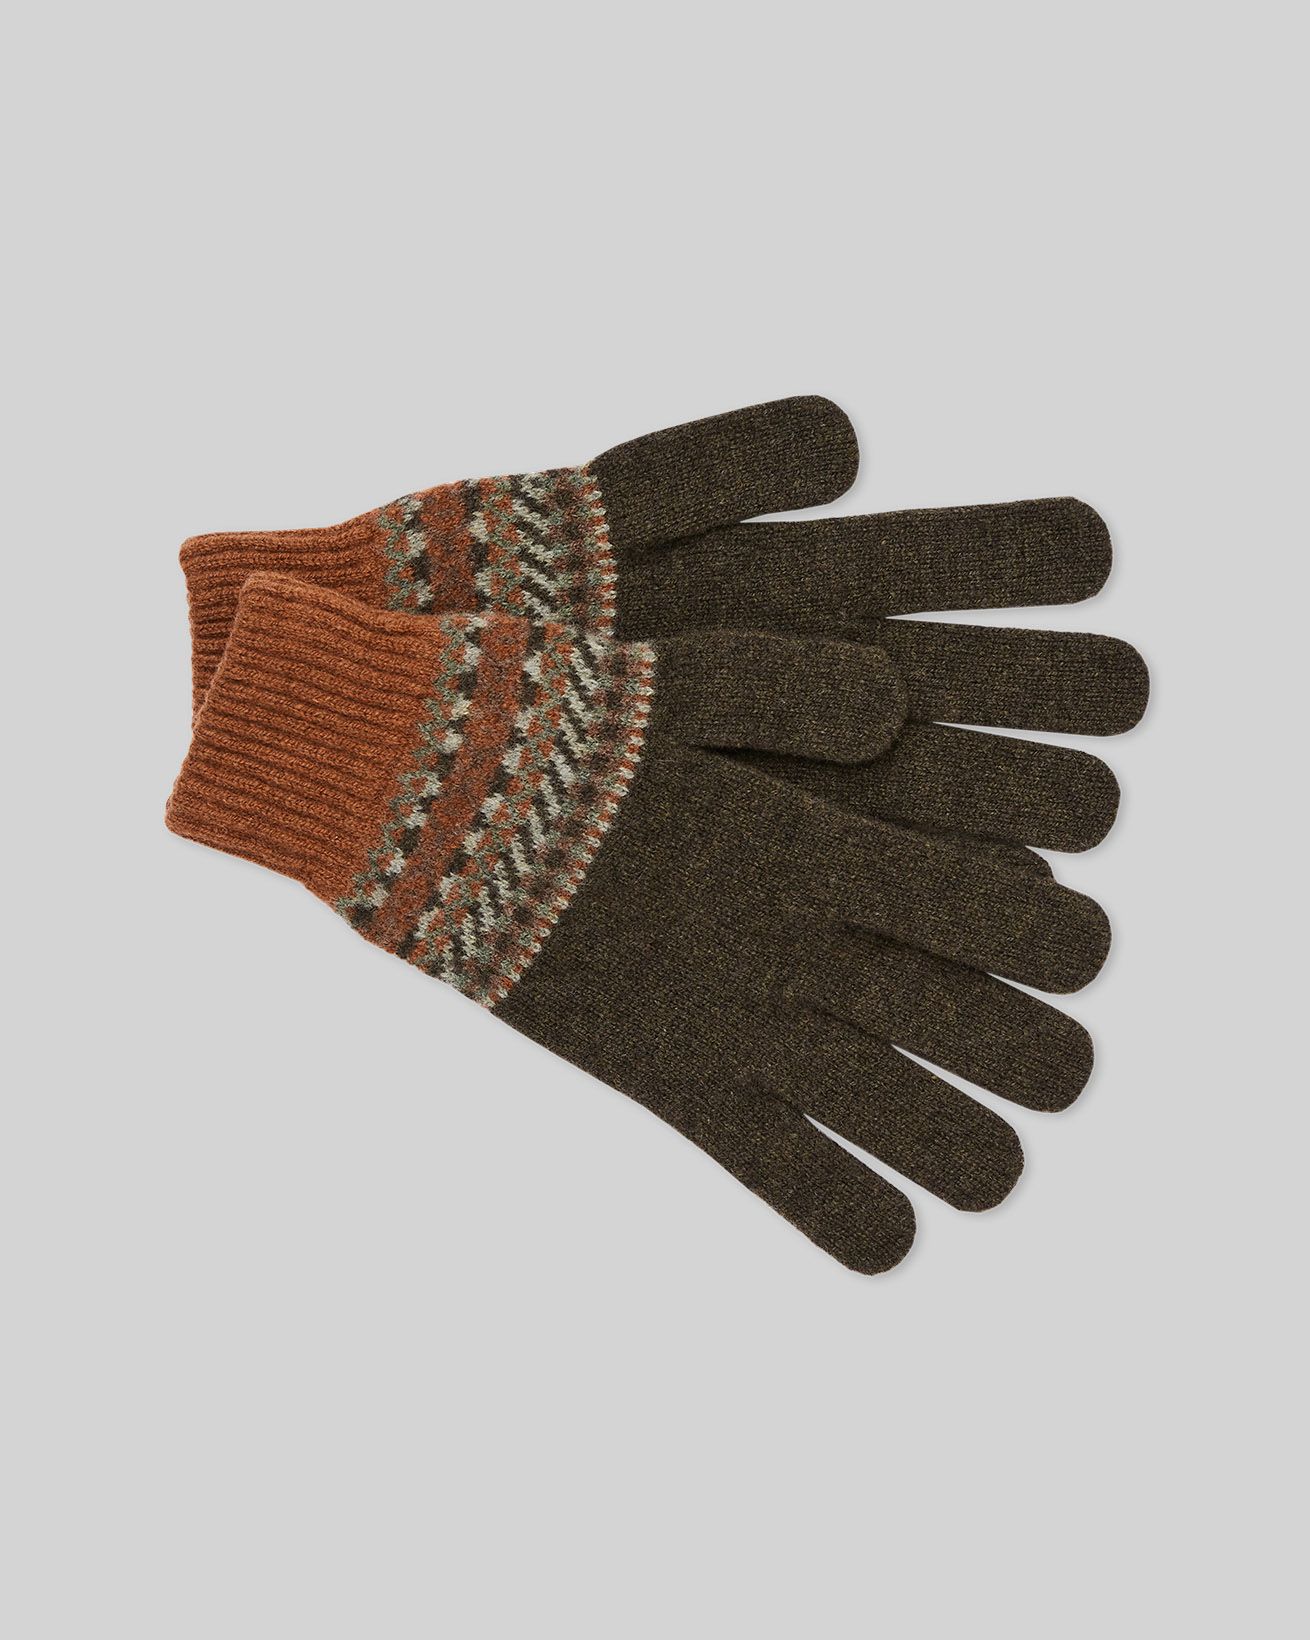 Mens fingerless Scottish Lambswool gloves. Choose from navy blue, black,  grey or brown - The Croft House